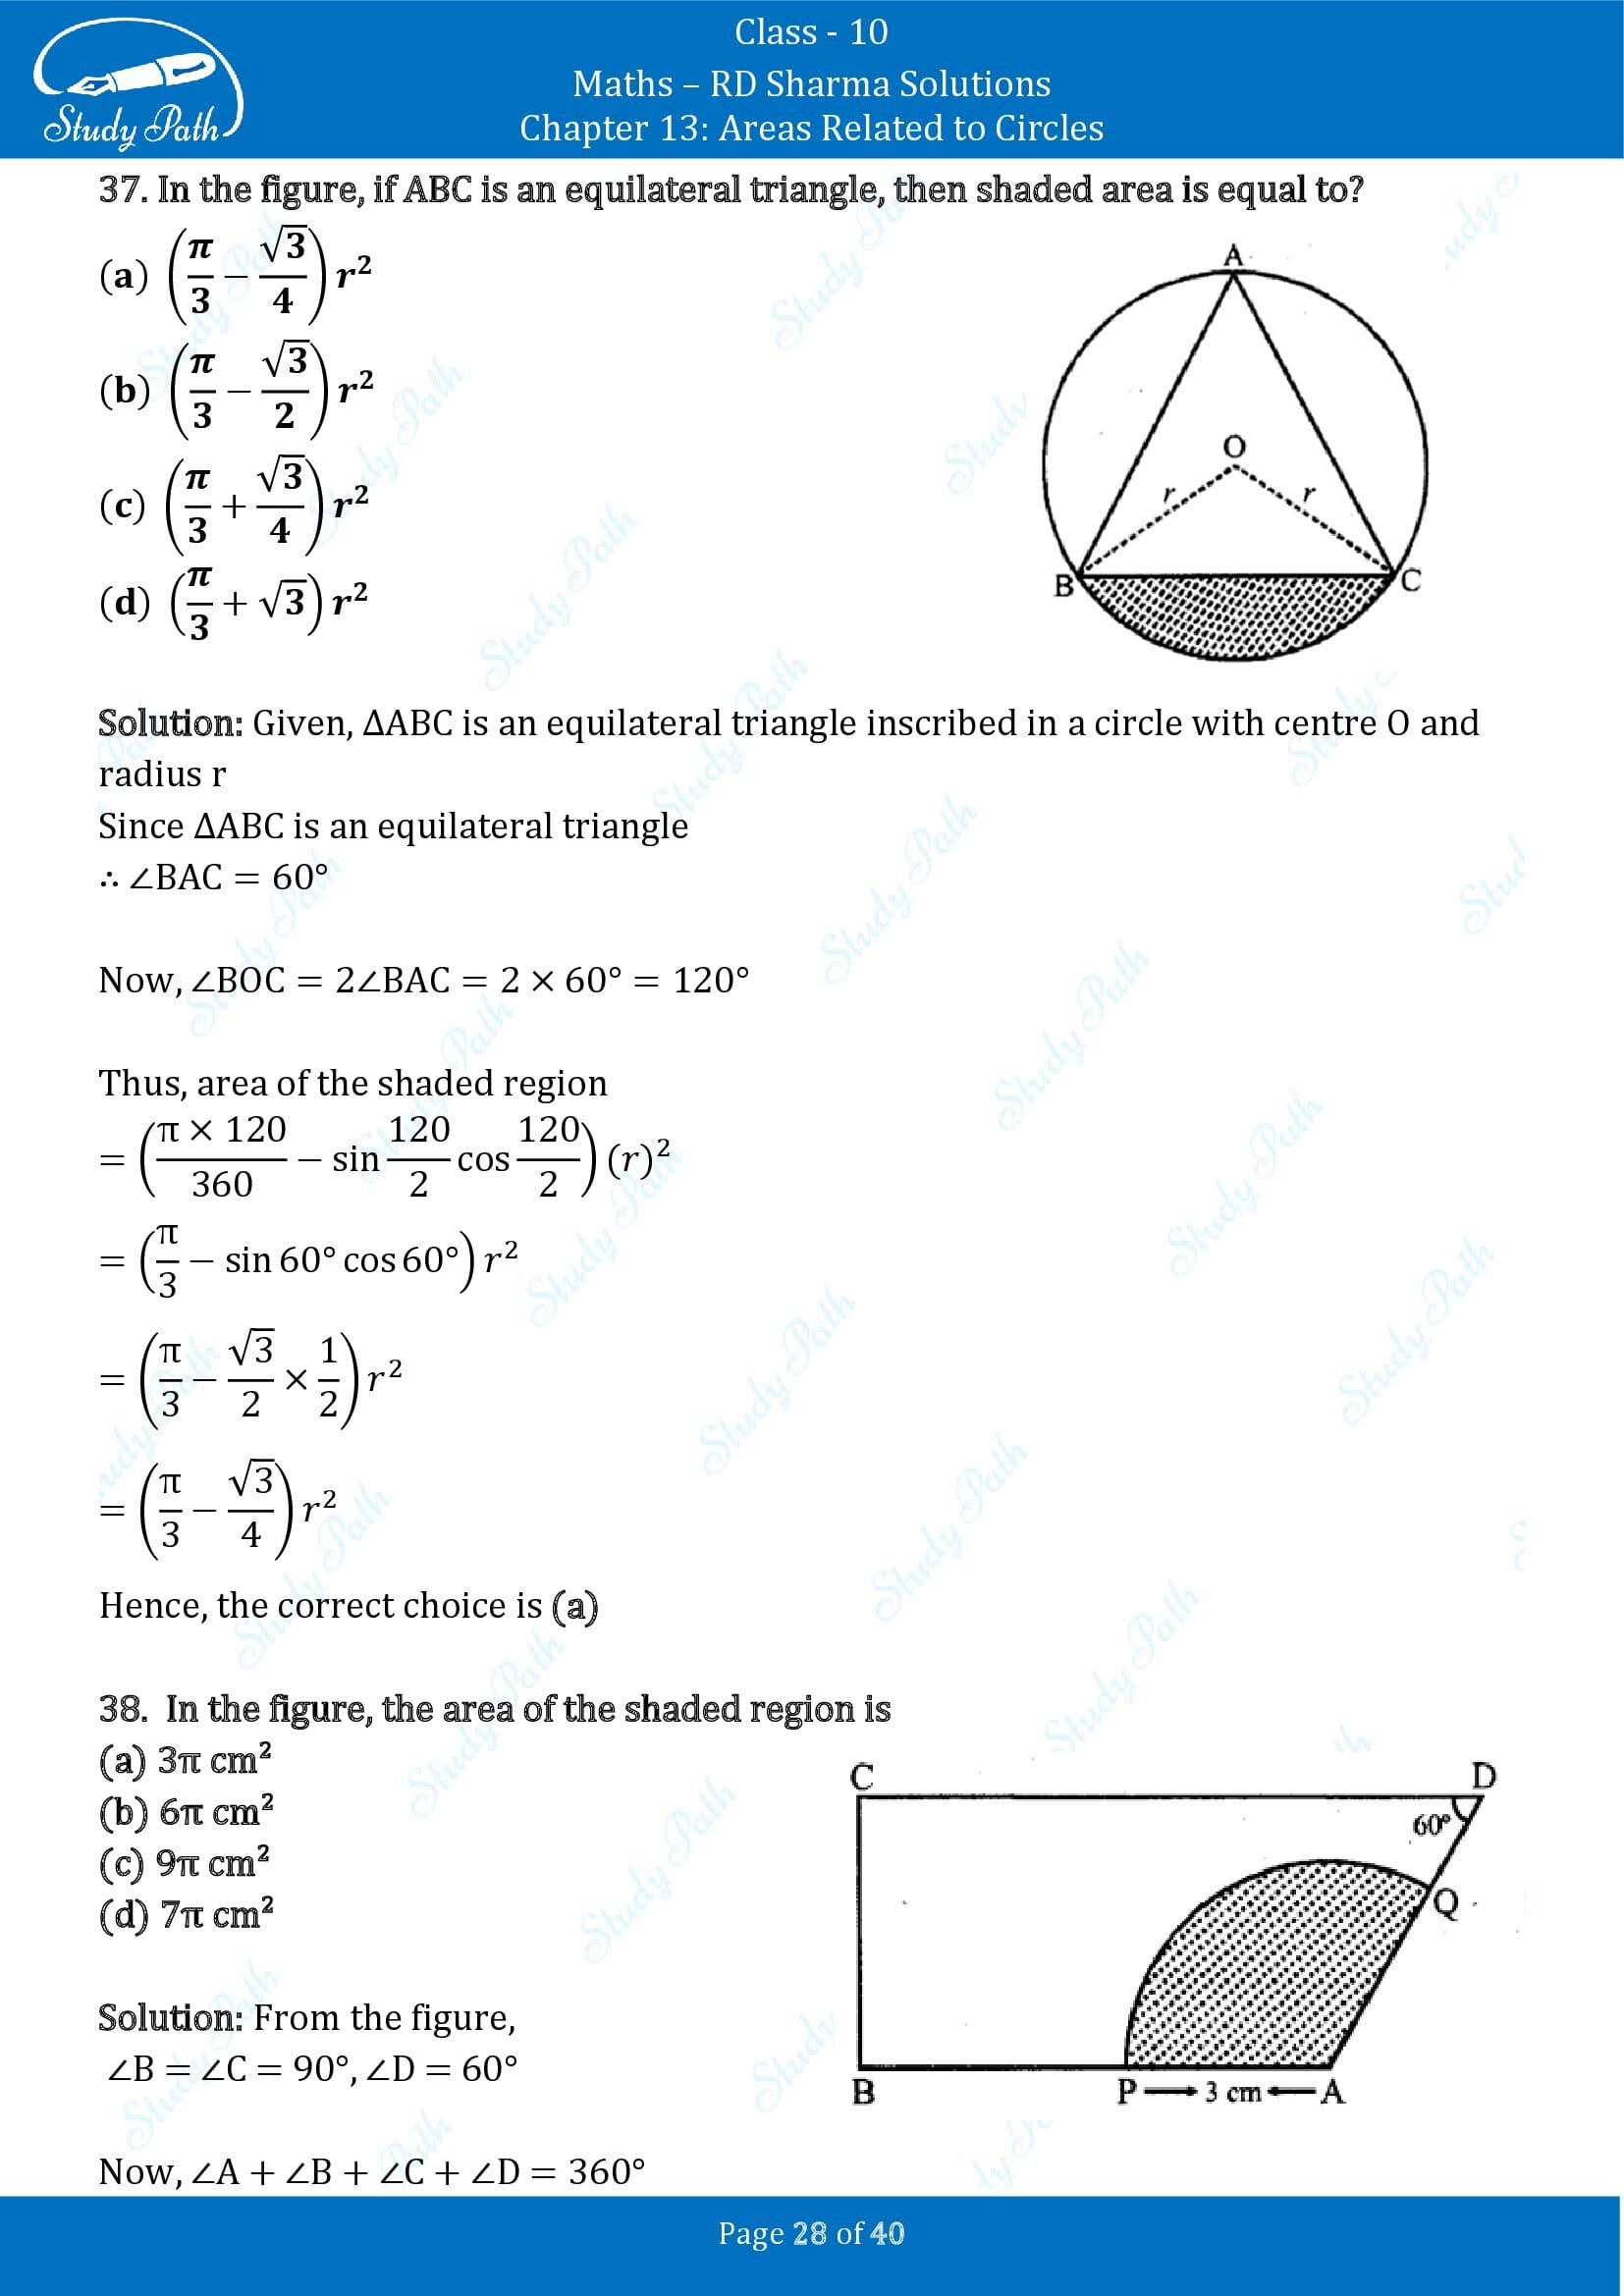 RD Sharma Solutions Class 10 Chapter 13 Areas Related to Circles Multiple Choice Question MCQs 00028